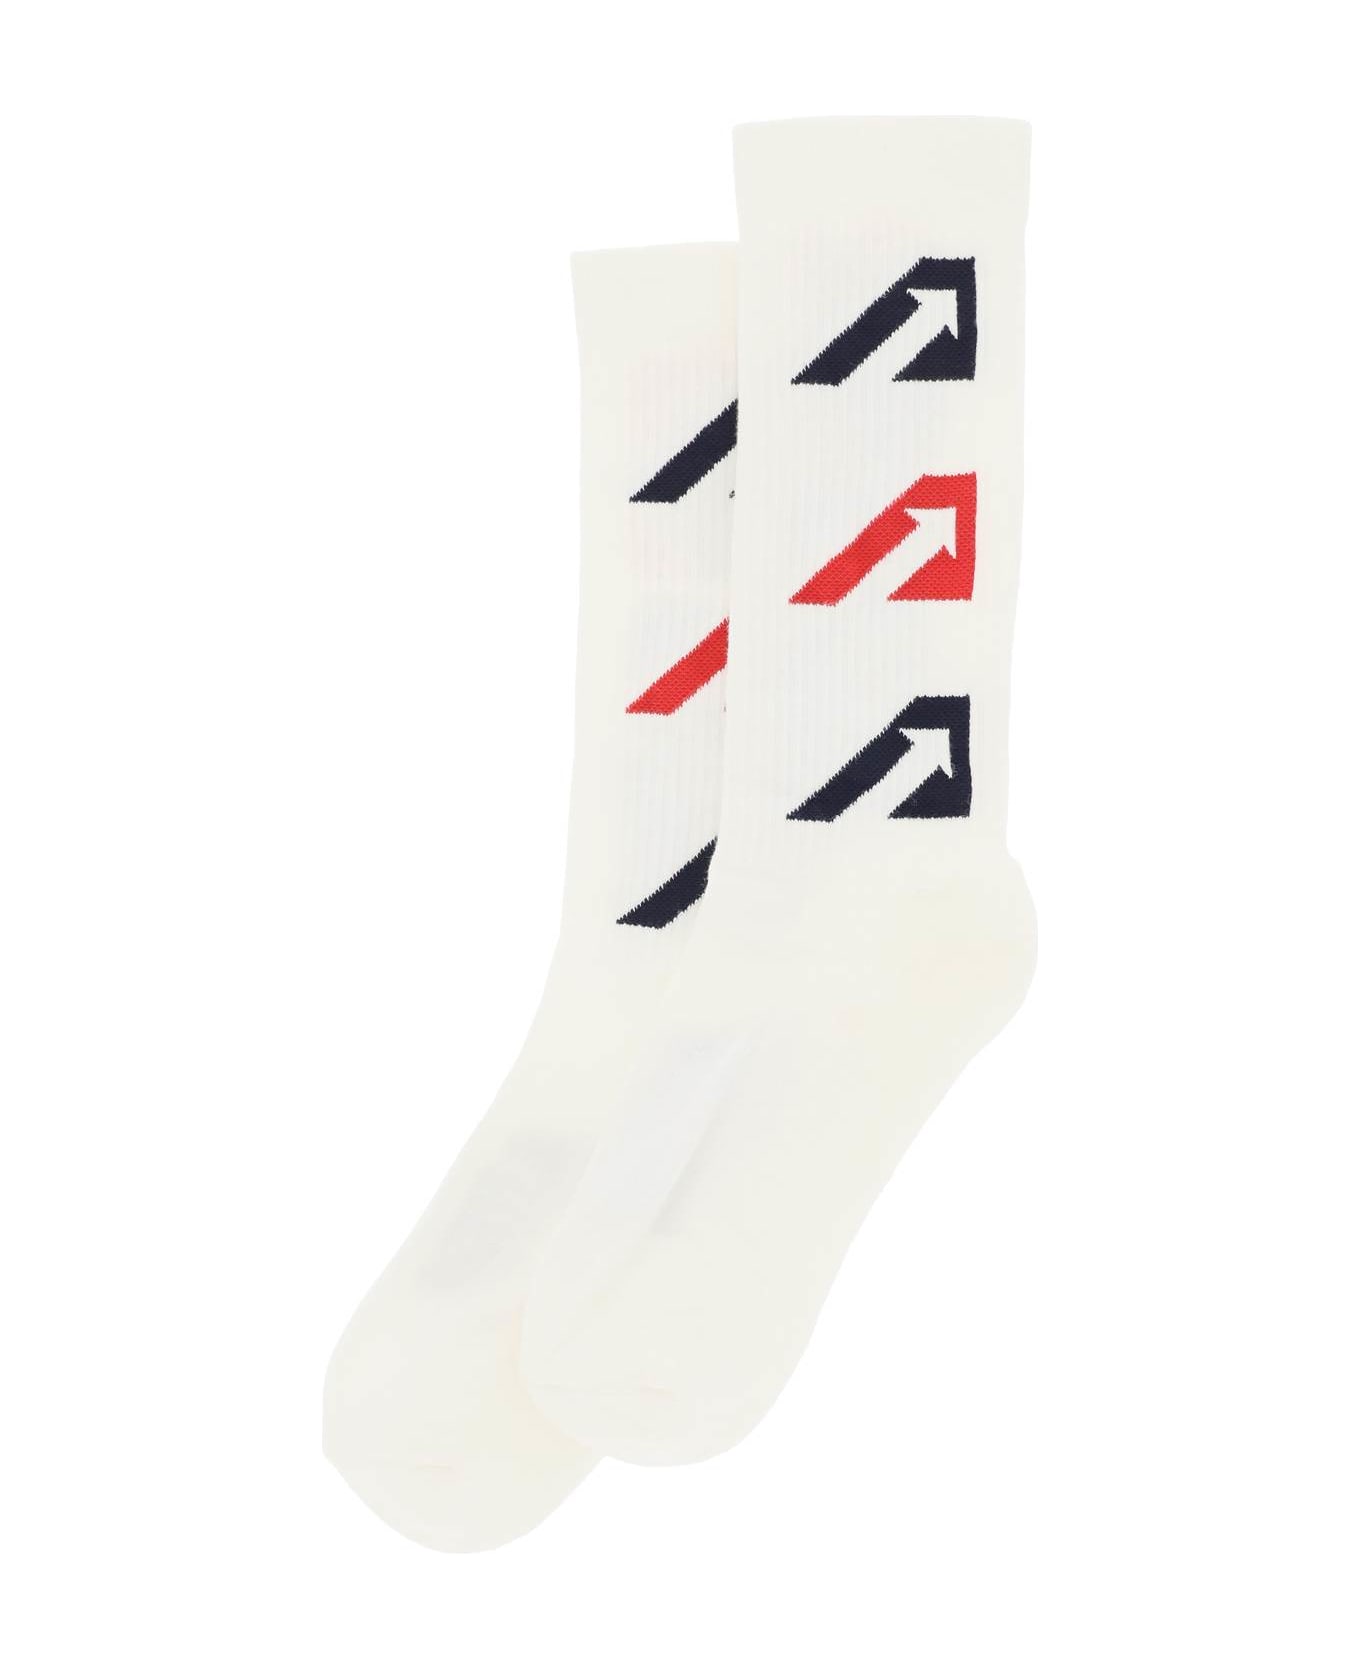 Autry Iconic Action Socks - White 靴下